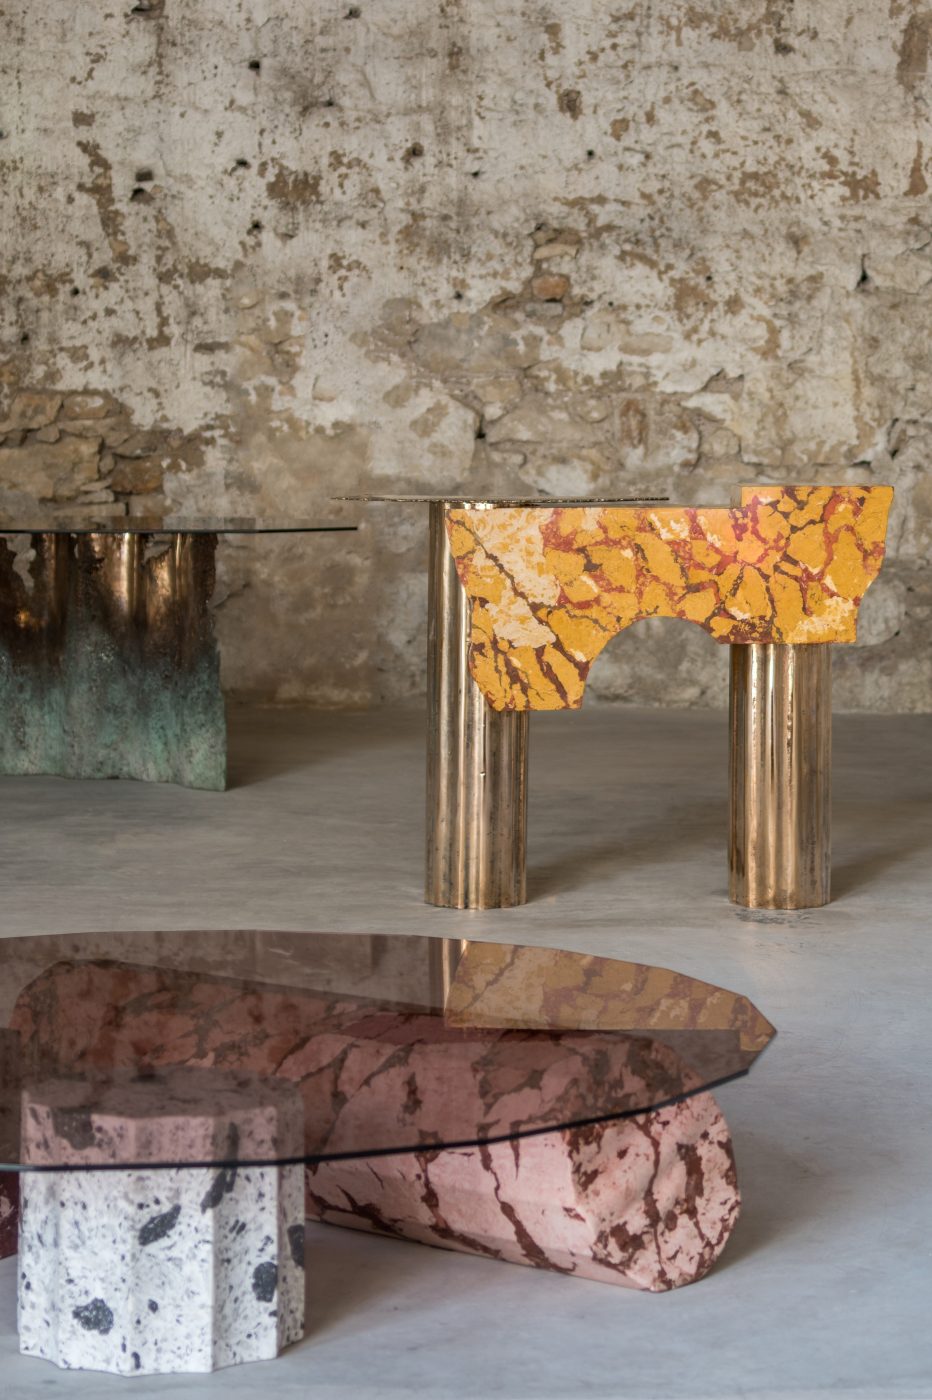  TURIN DINING TABLE, KNOSSOS CONSOLE and OLYMPIA LOW TABLE by Roberto Sironi